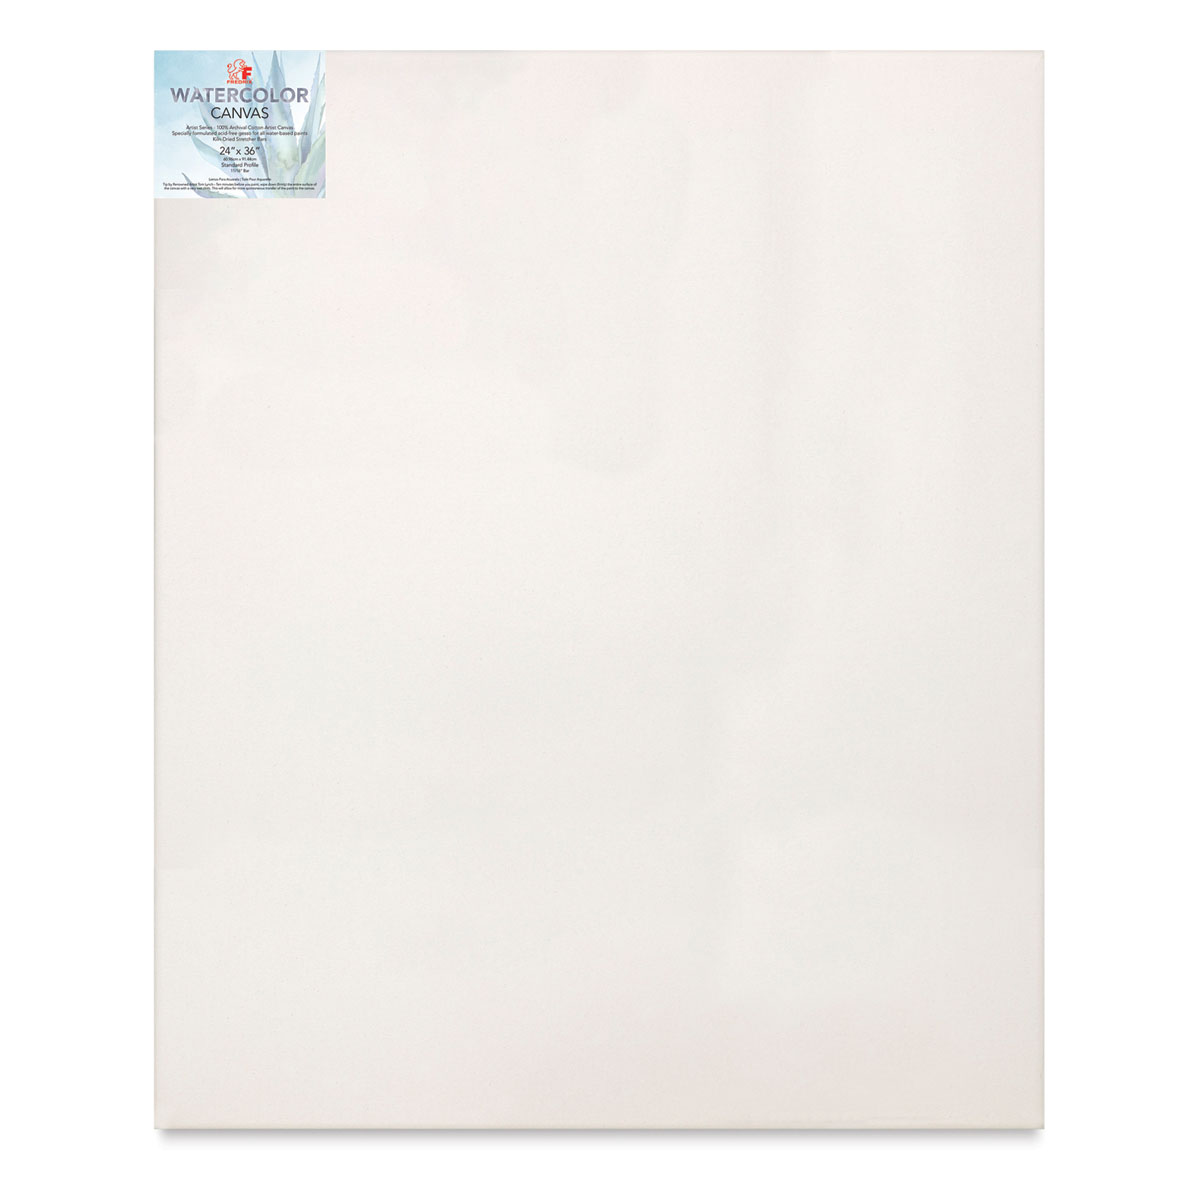 Pre Stretched Canvas 18x24 2 Pack Large Stretched Canvases for Painting  Four fold Acrylic Titanium Priming Blank Canvas Boards for Painting